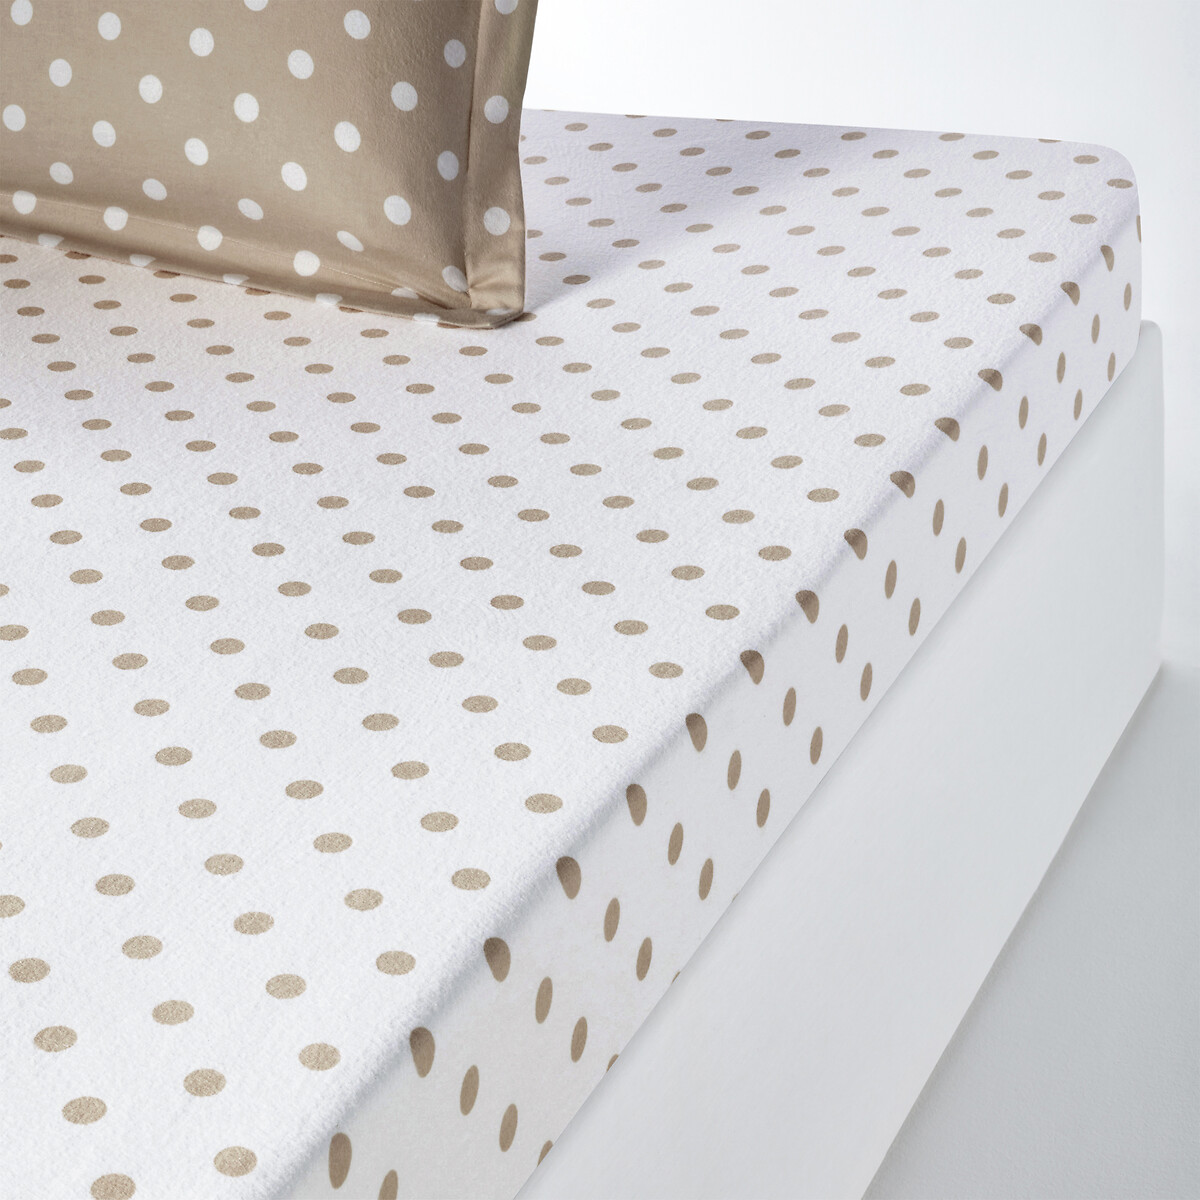 Clarisse Polka Dot 100% Cotton Flannel Fitted Sheet